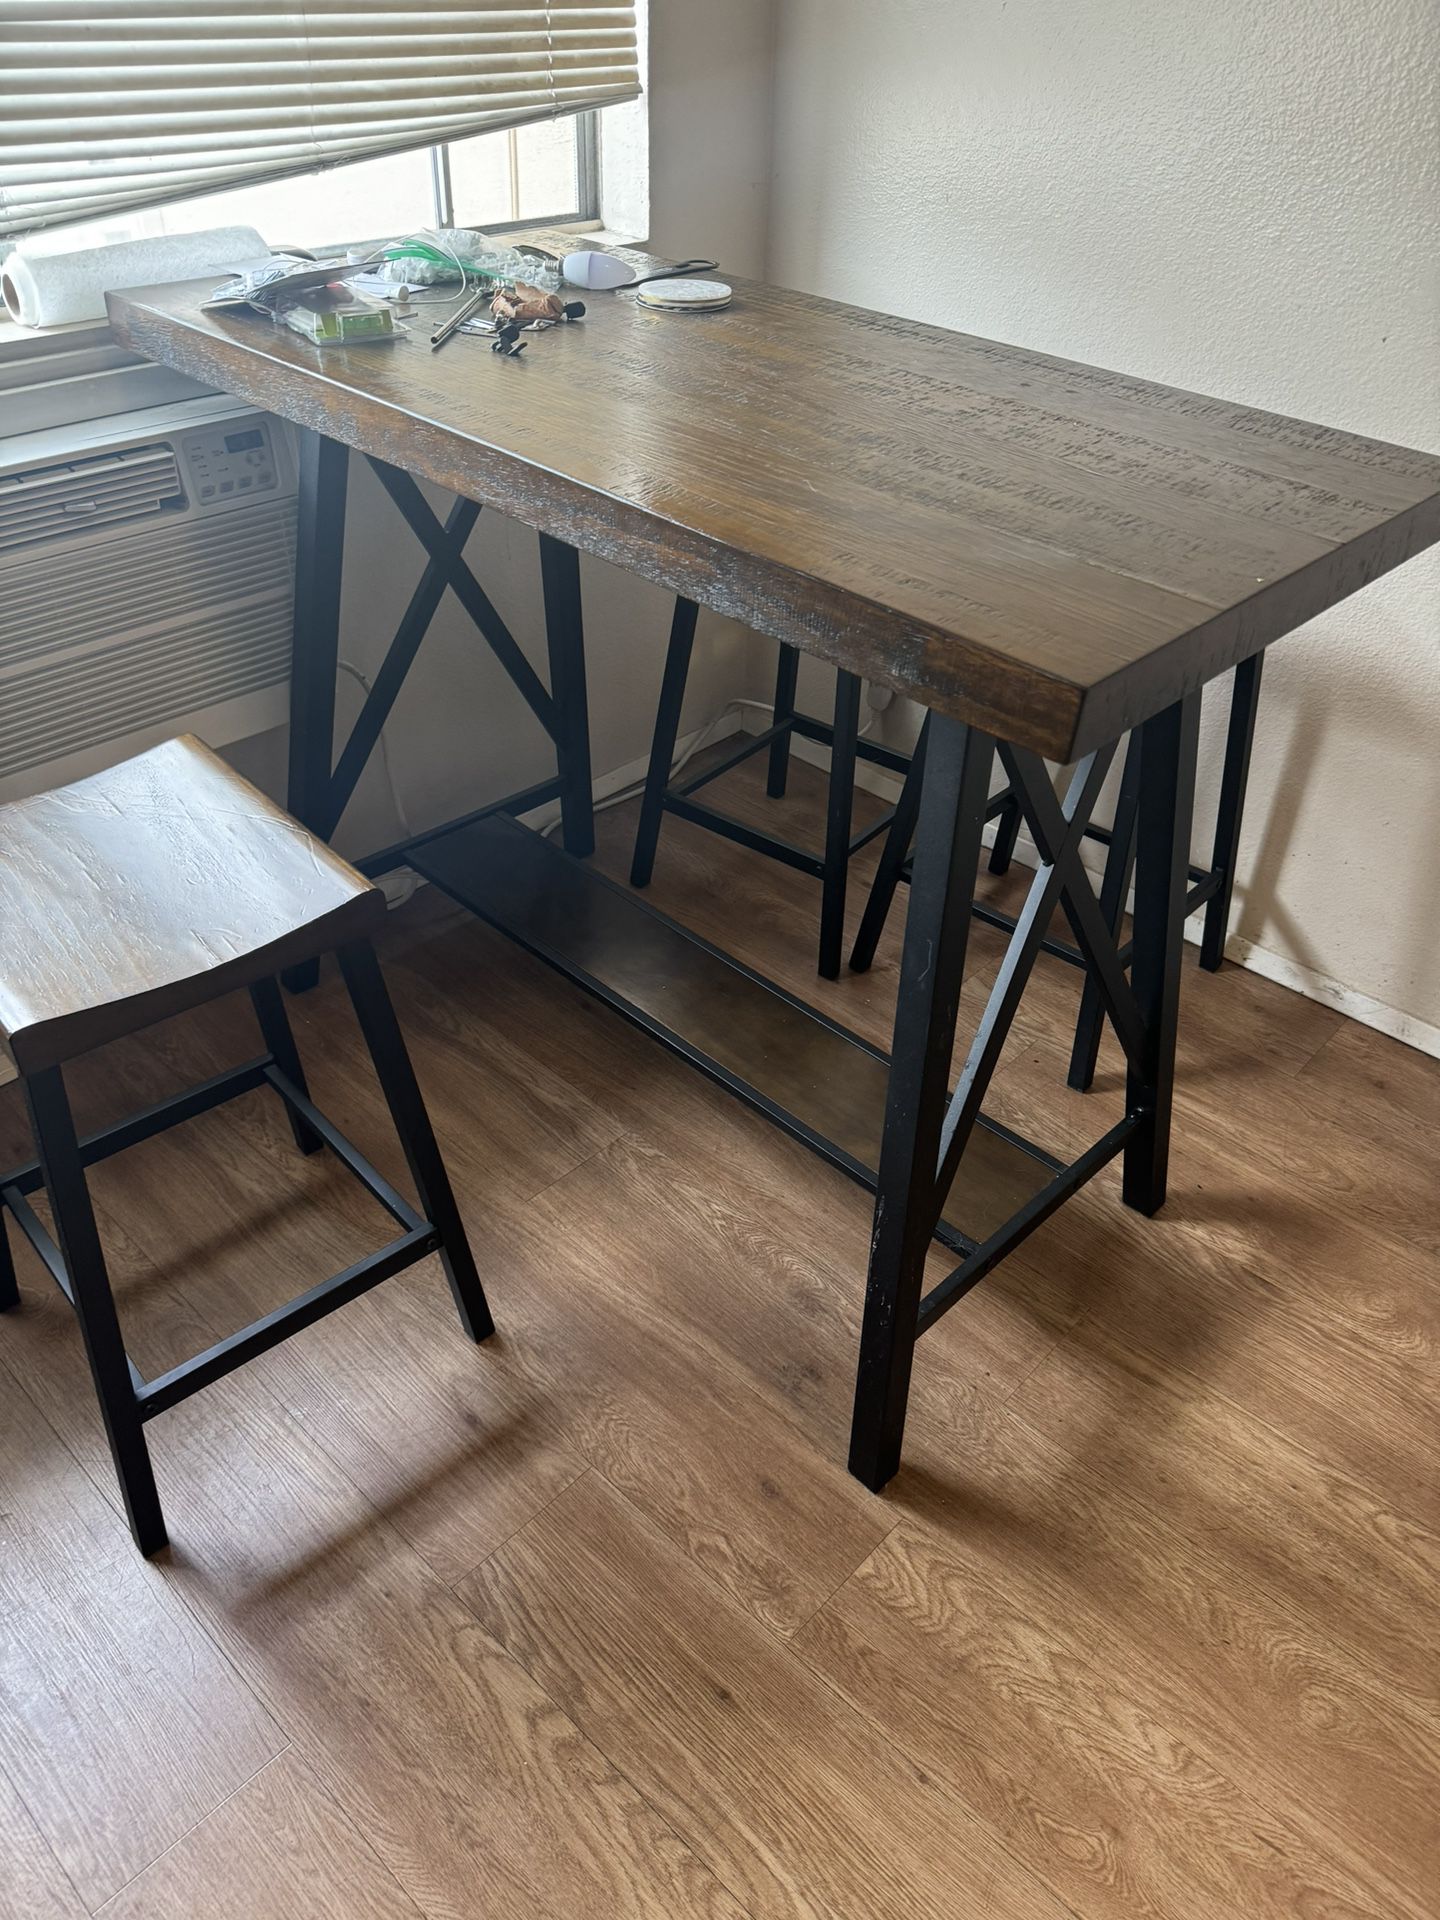 Wood Kitchen Table with Chairs 